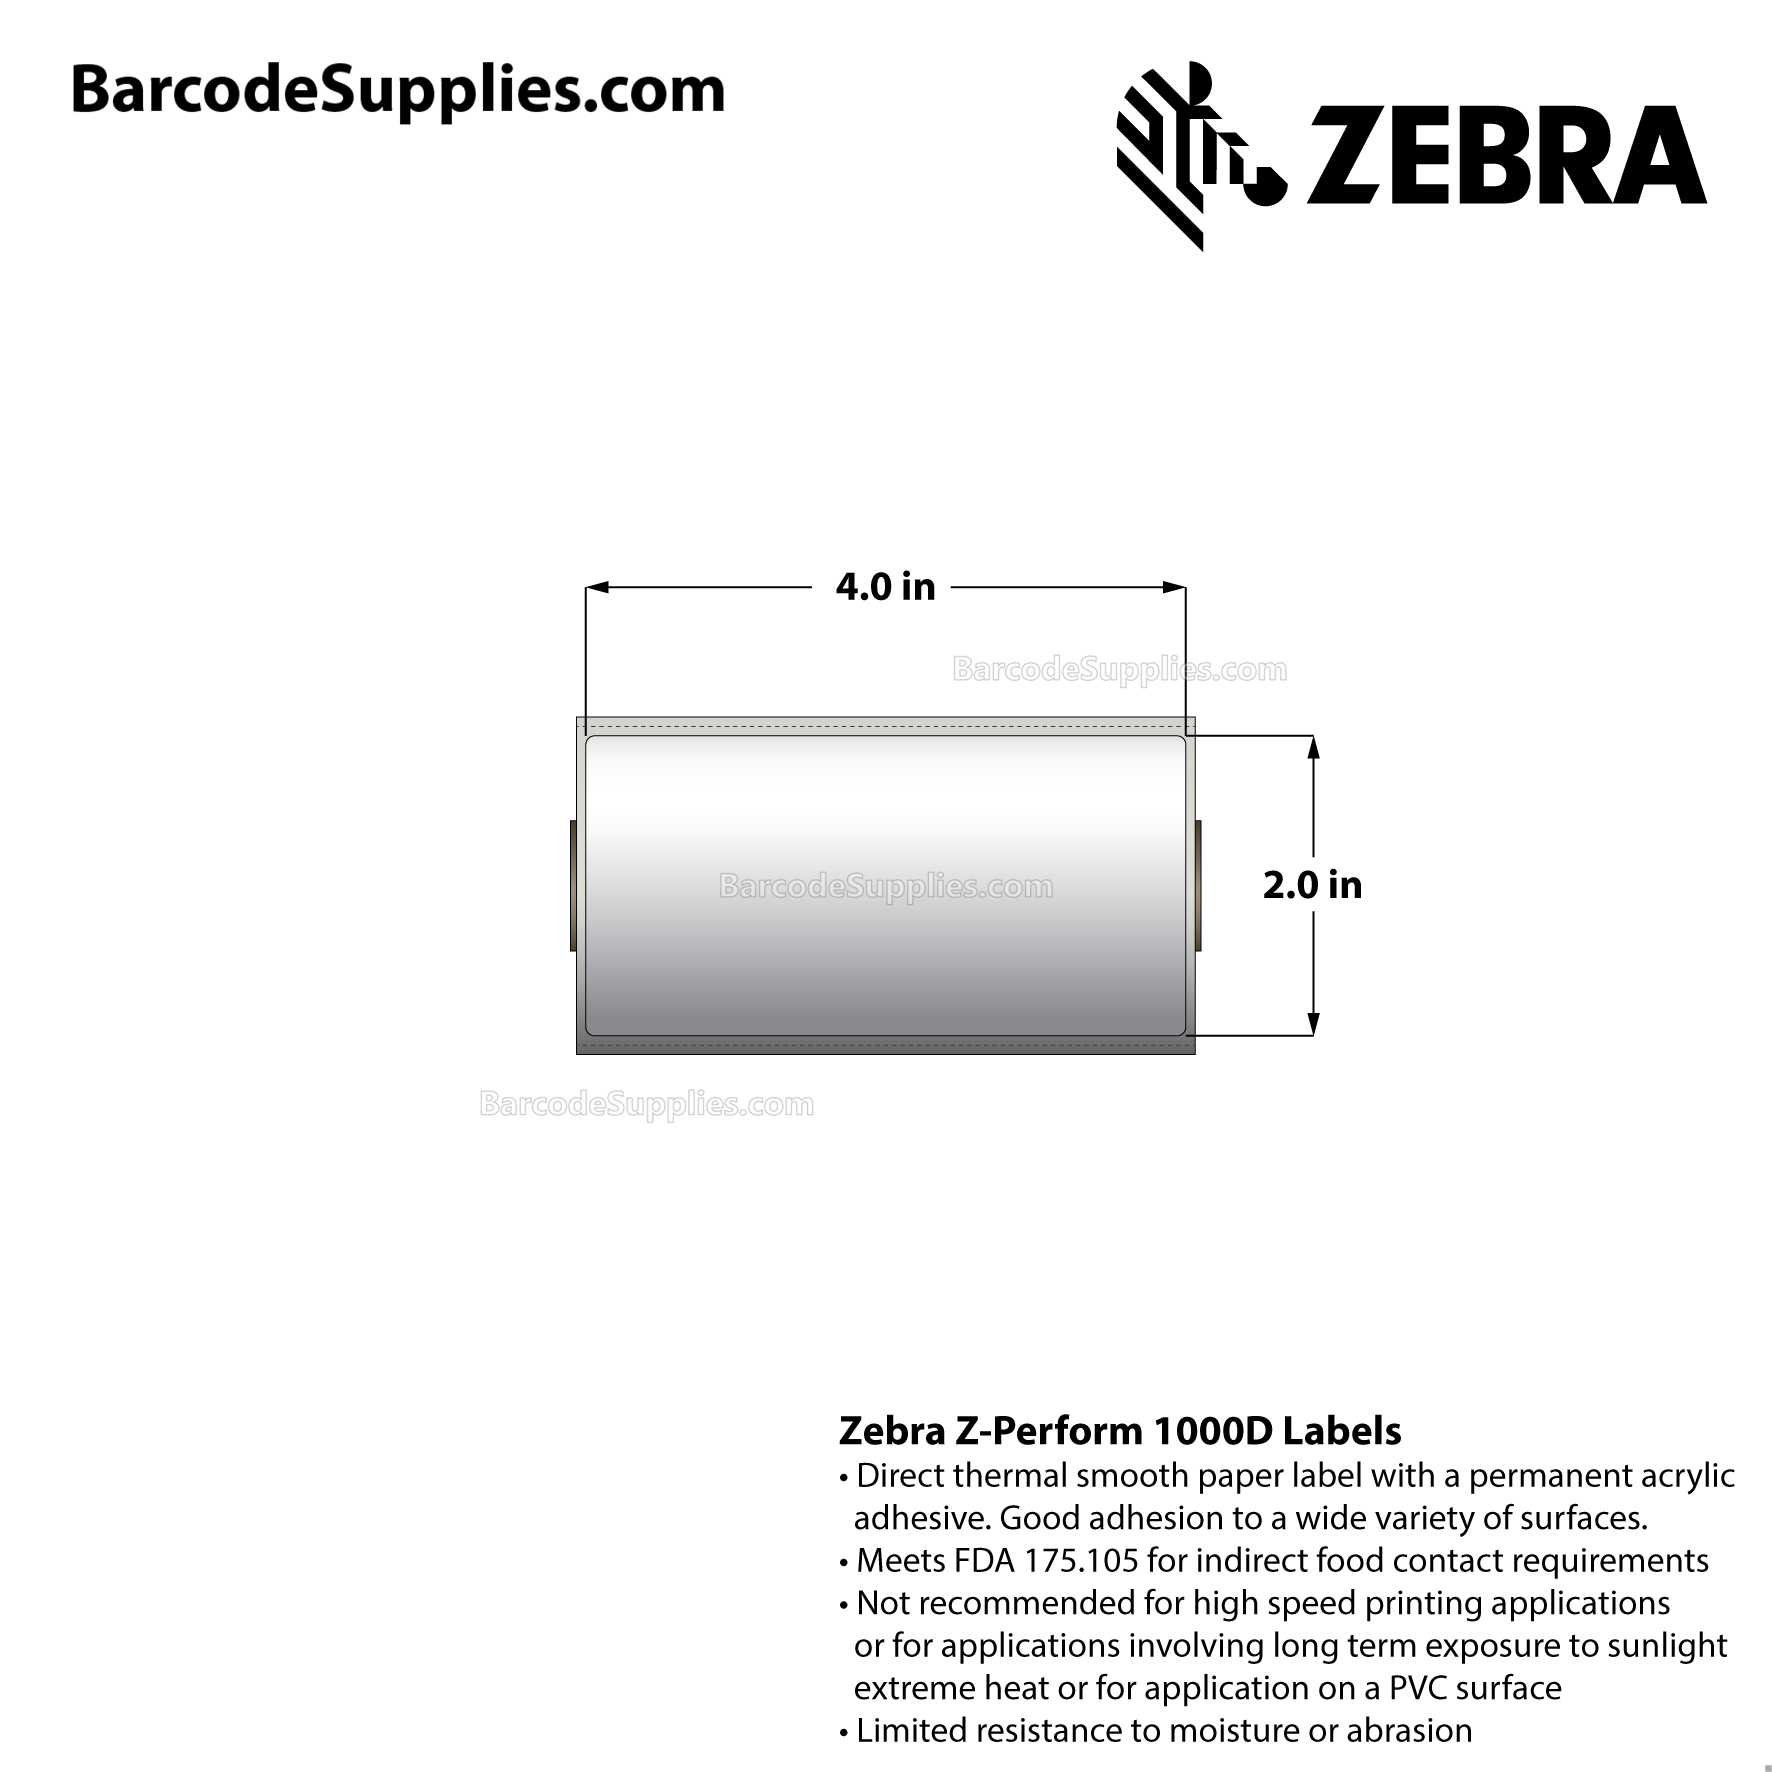 4 x 2 Direct Thermal White Z-Perform 1000D Labels With Permanent Adhesive - Perforated - 230 Labels Per Roll - Carton Of 36 Rolls - 8280 Labels Total - MPN: 10026372